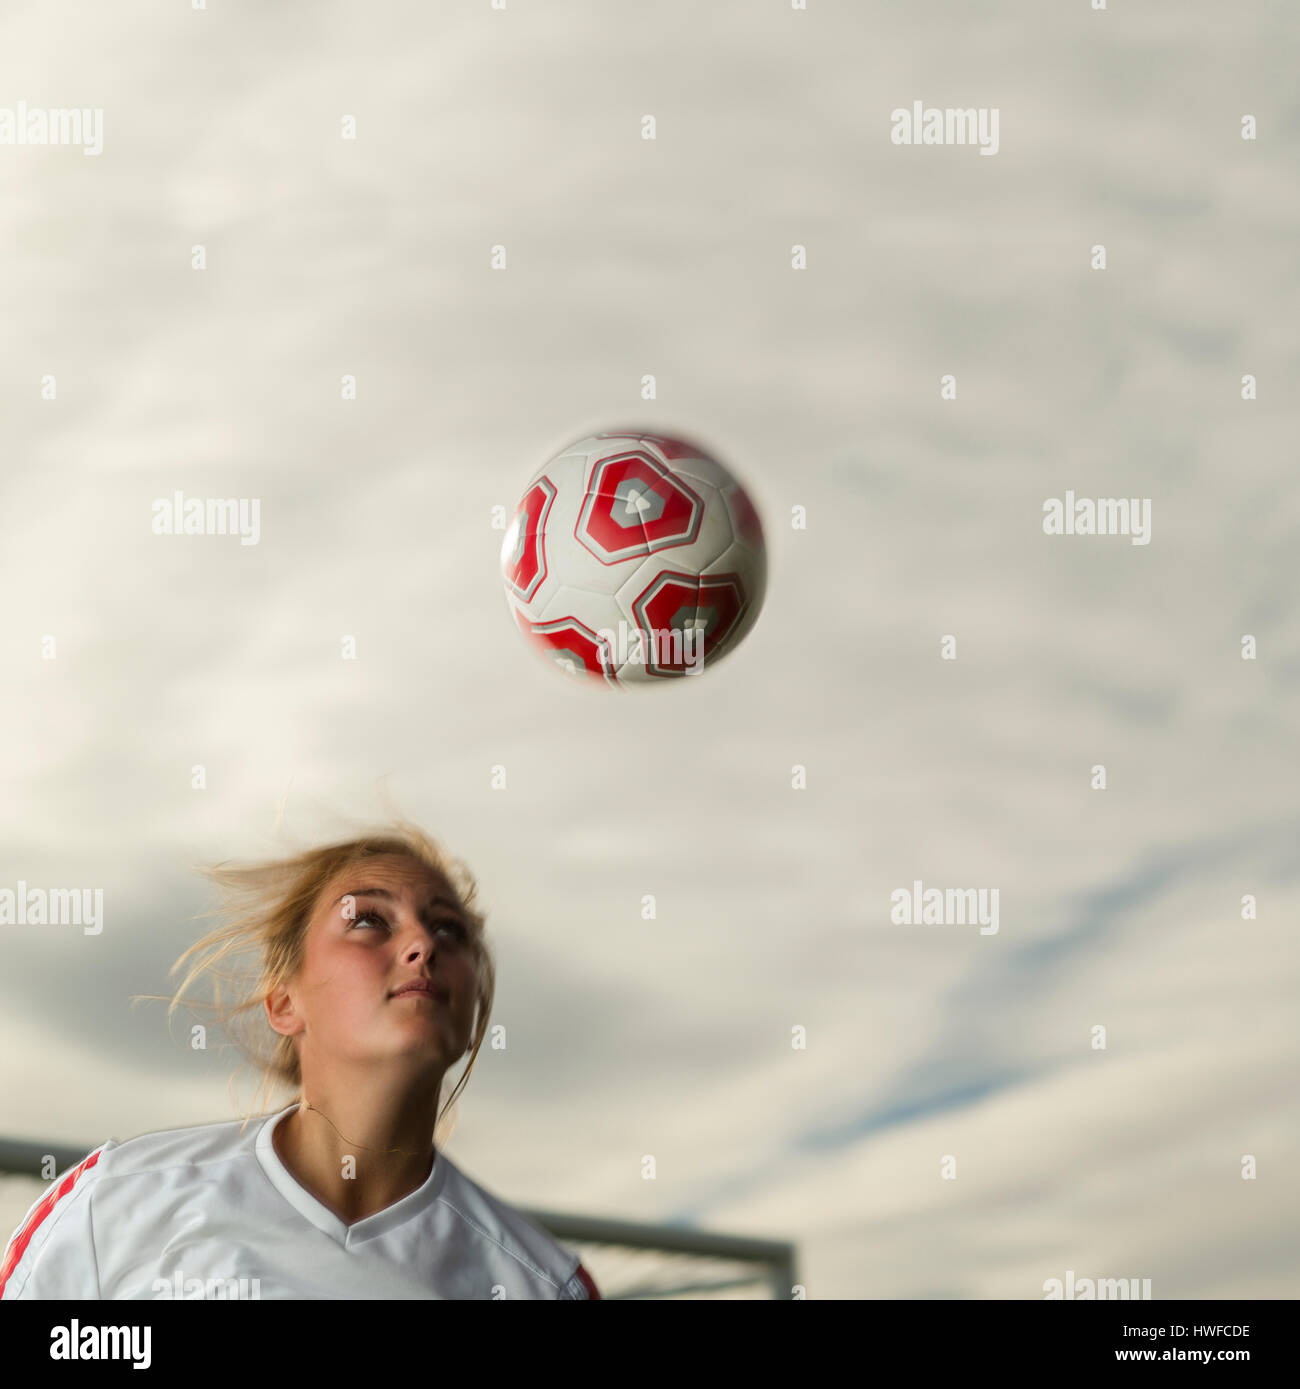 Low angle view of athlete hitting ball with head in soccer goal under cloudy sky Stock Photo